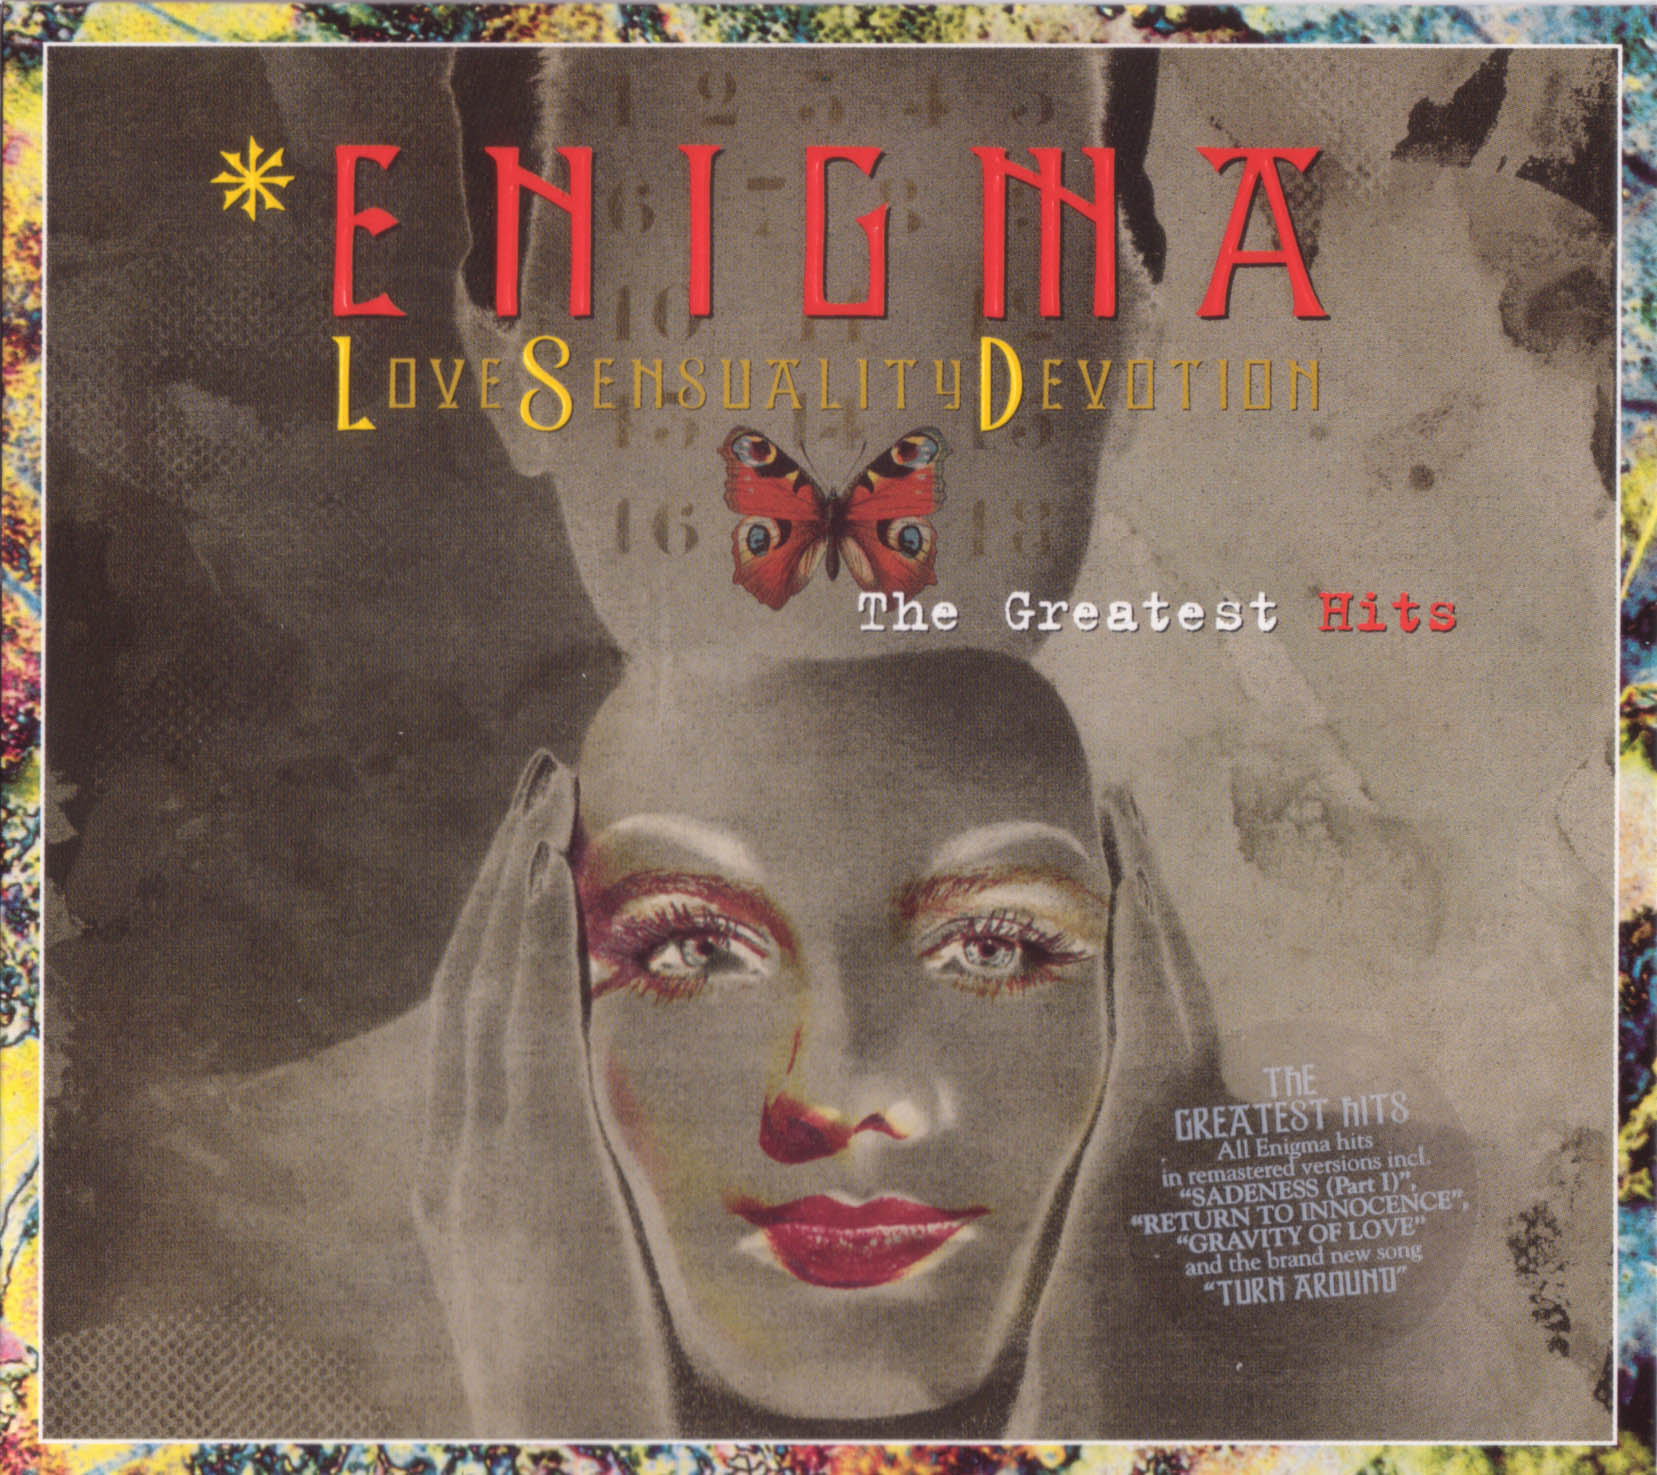 http://images.coveralia.com/audio/e/Enigma-Love_Sensuality_Devotion_The_Greatest_Hits-Frontal.jpg